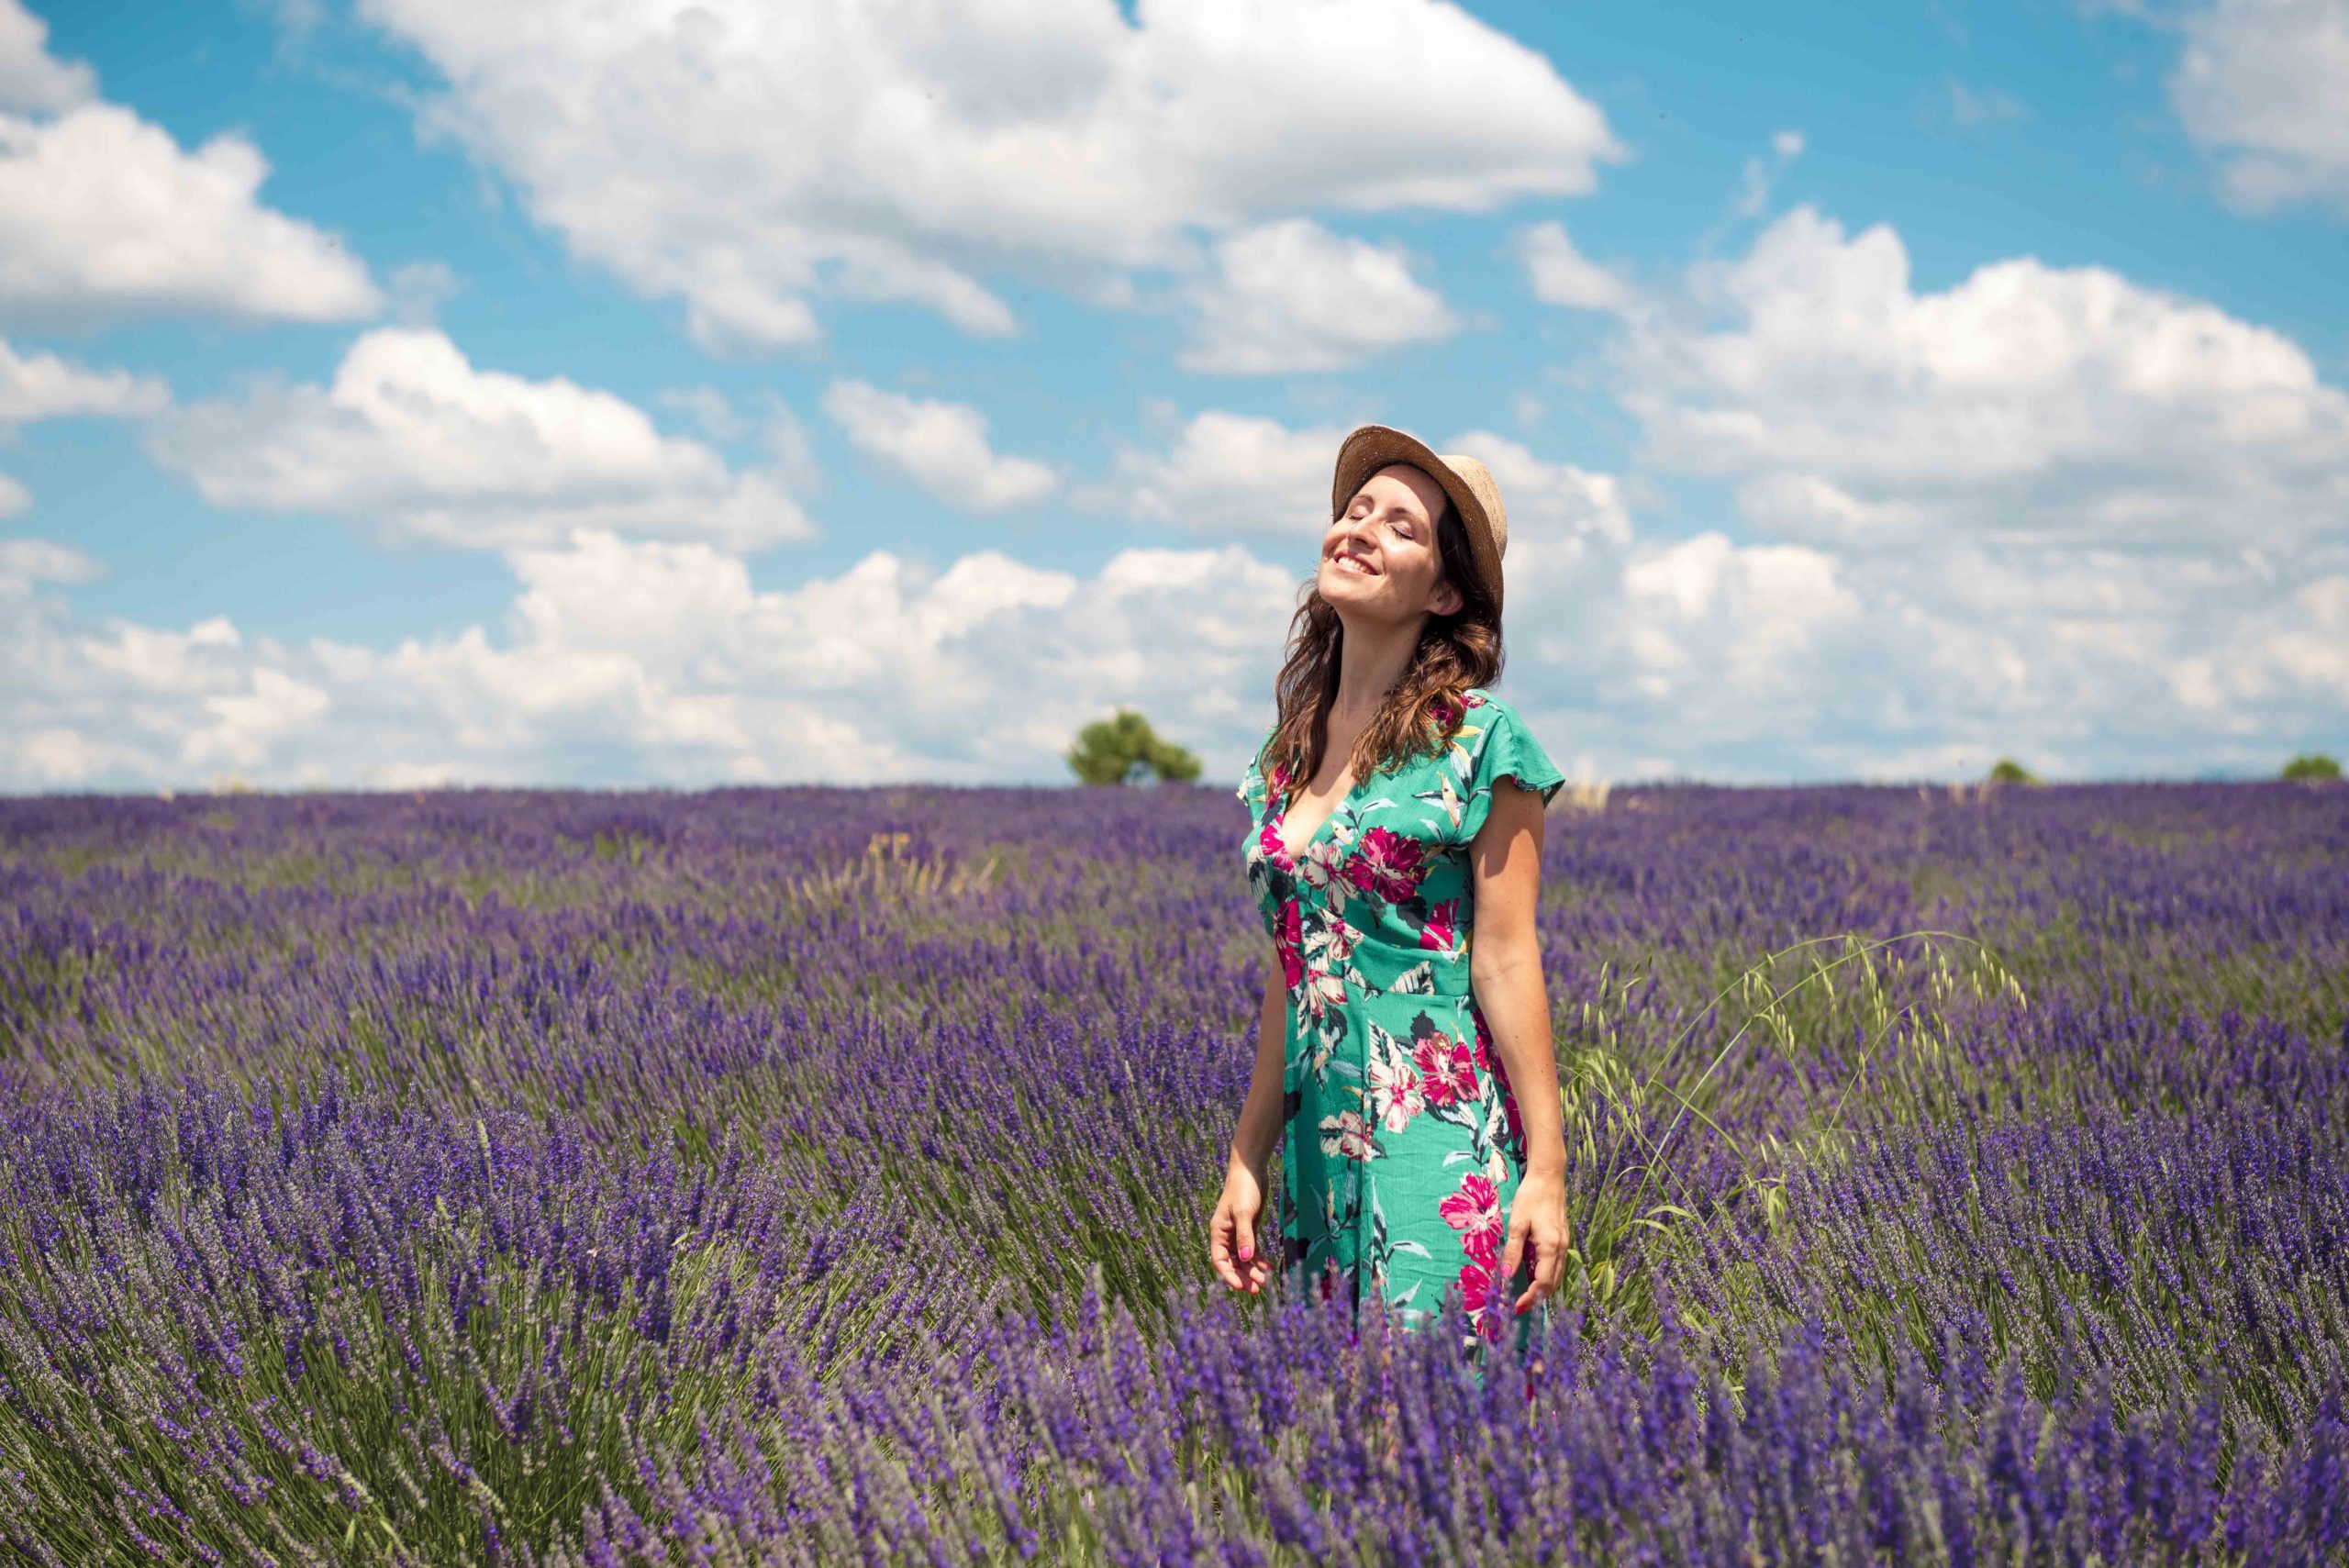 French Fashion Valensole. Photo by westend61 via Envato Elements